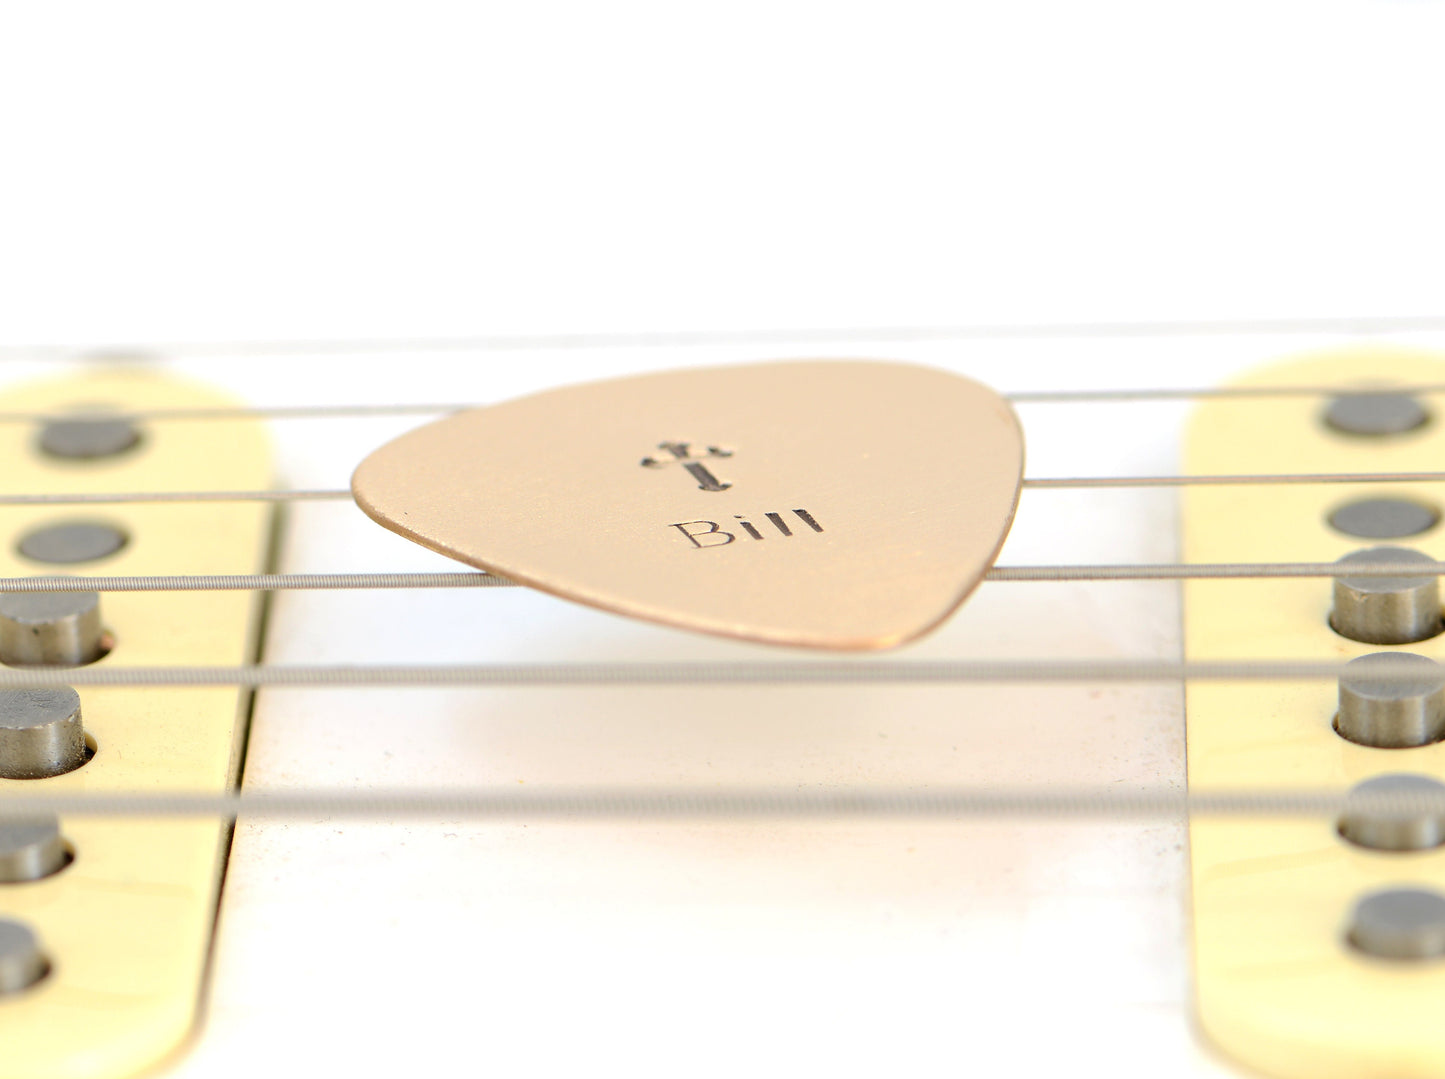 Customized name on a bronze guitar pick